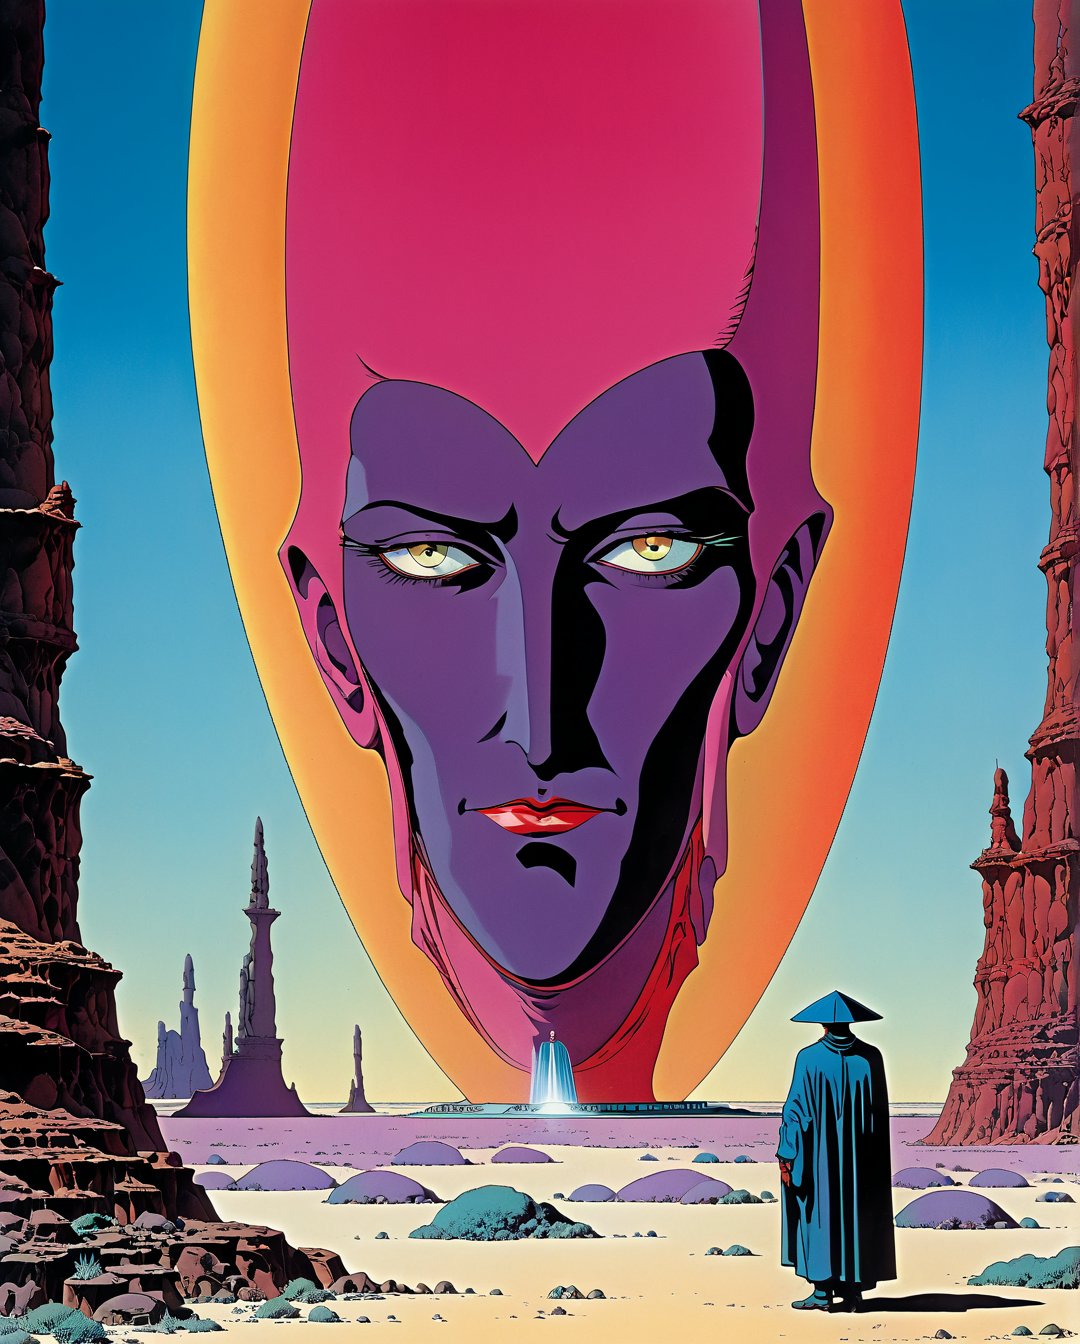 Moebius (Jean Giraud) Style - A picture by Jean Giraud Moebius, ((masterpiece)), ((best quality)), (masterpiece, highest quality), (masterpiece), Surreal Collage - High contrast Freak Show Bright Colors surreal collagecrystal clear art style by Moebius